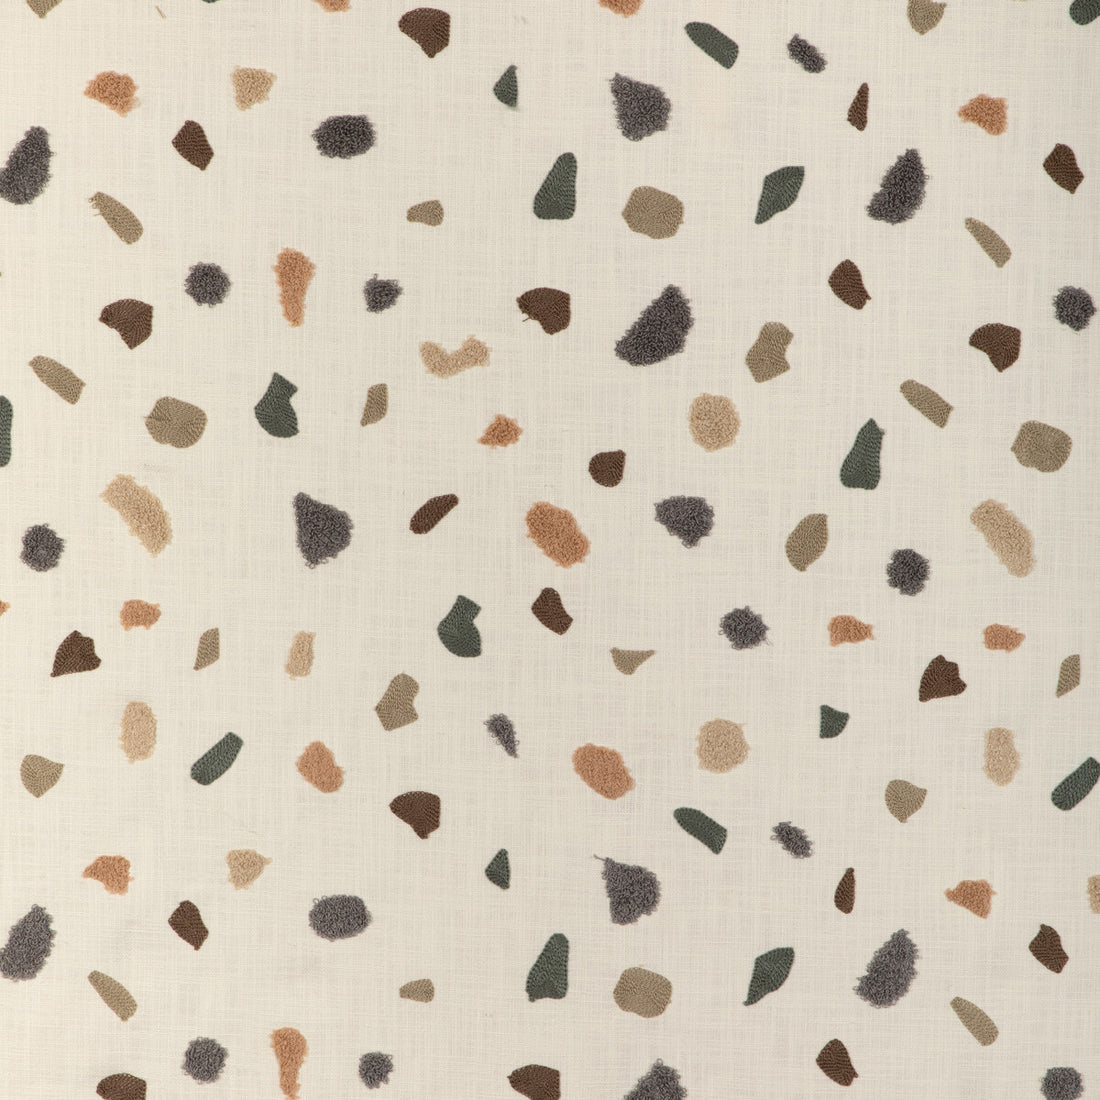 Kravet Basics fabric in 37173-635 color - pattern 37173.635.0 - by Kravet Basics in the Modern Embroideries III collection